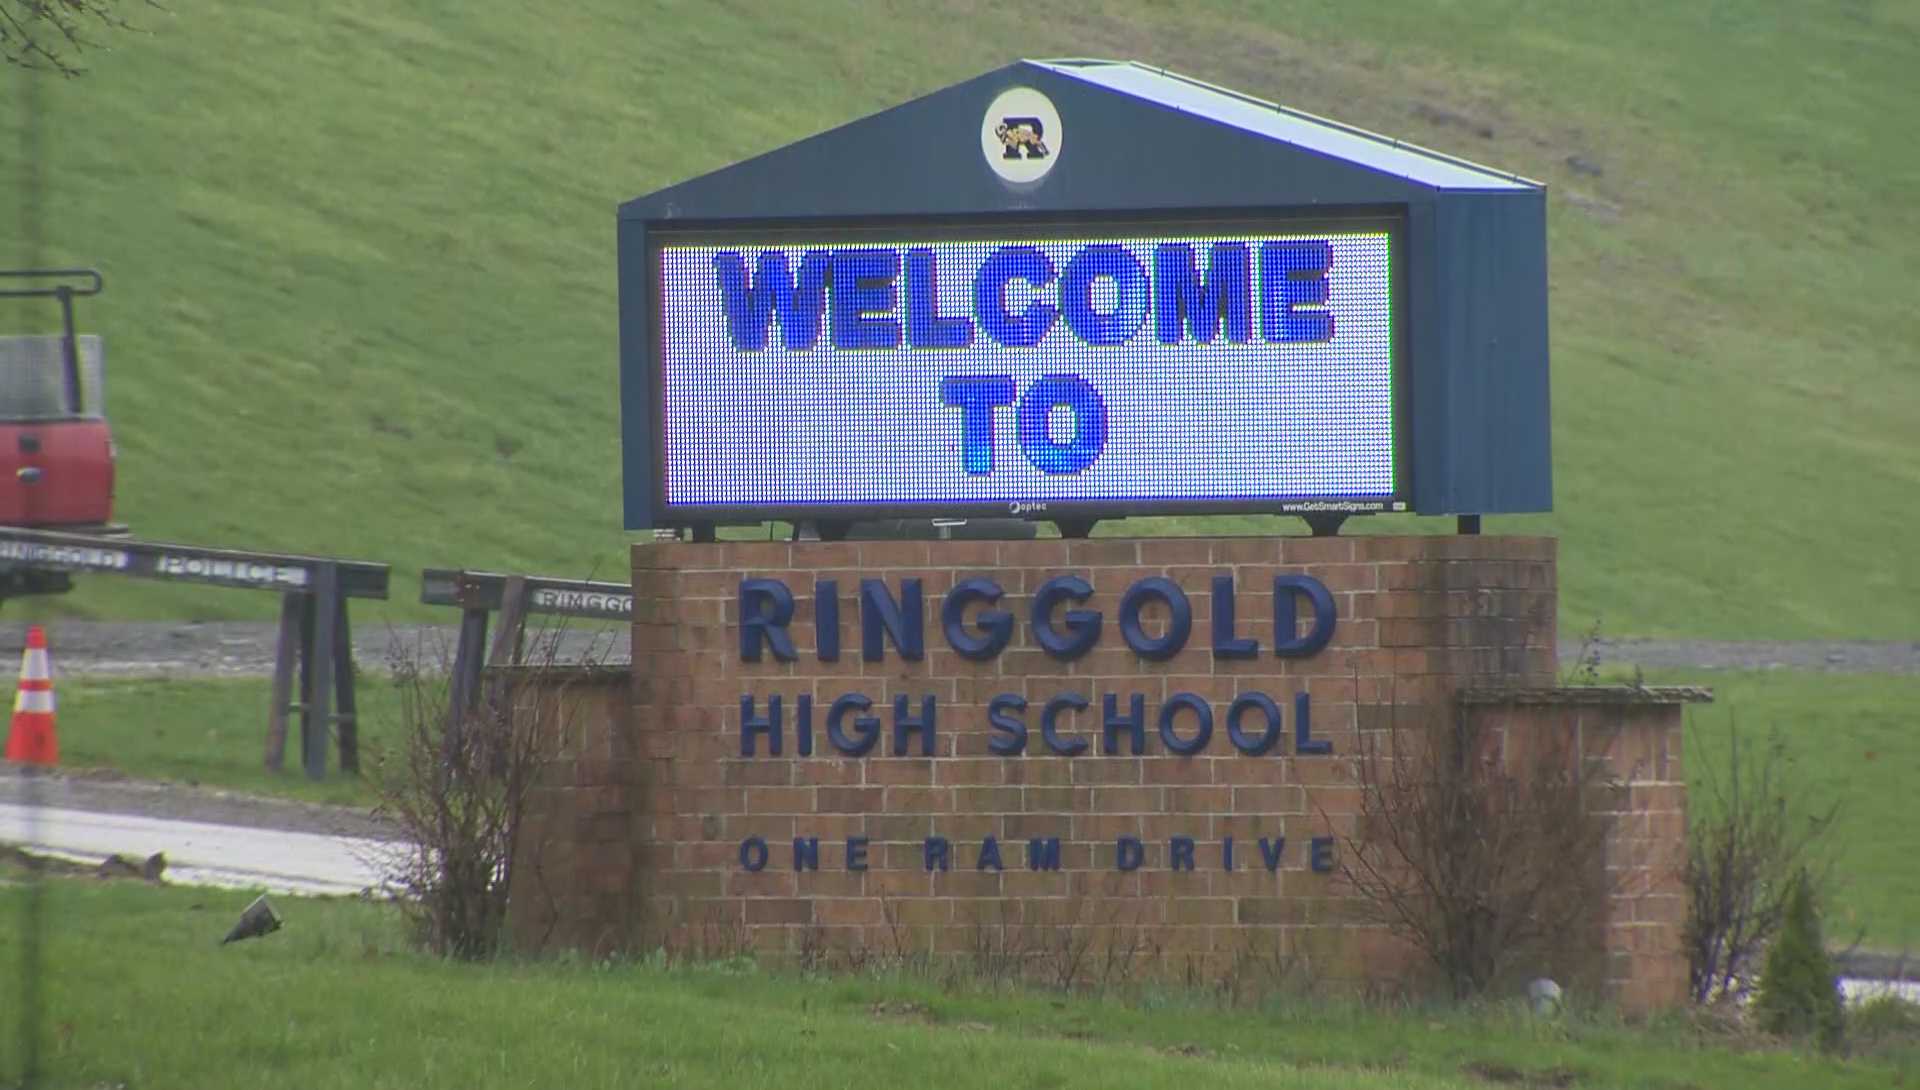 No deal reached; Strike to continue in Ringgold School District after talks fail again